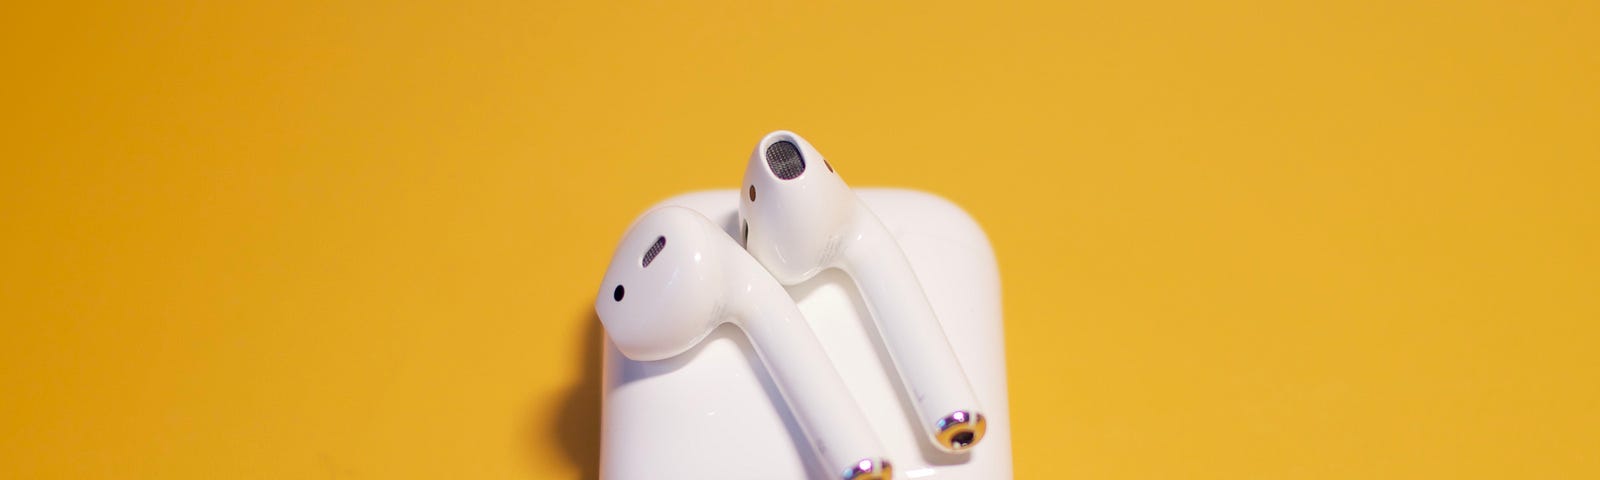 AirPods lying on the case on a yellowish backgrund.